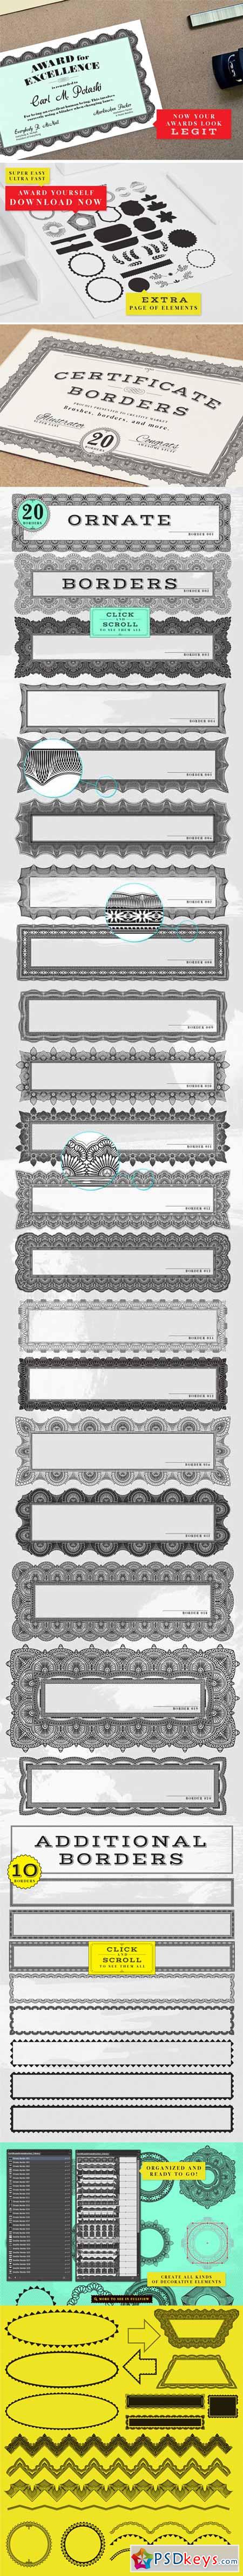 Certificate Style Ornate Brushes 360594